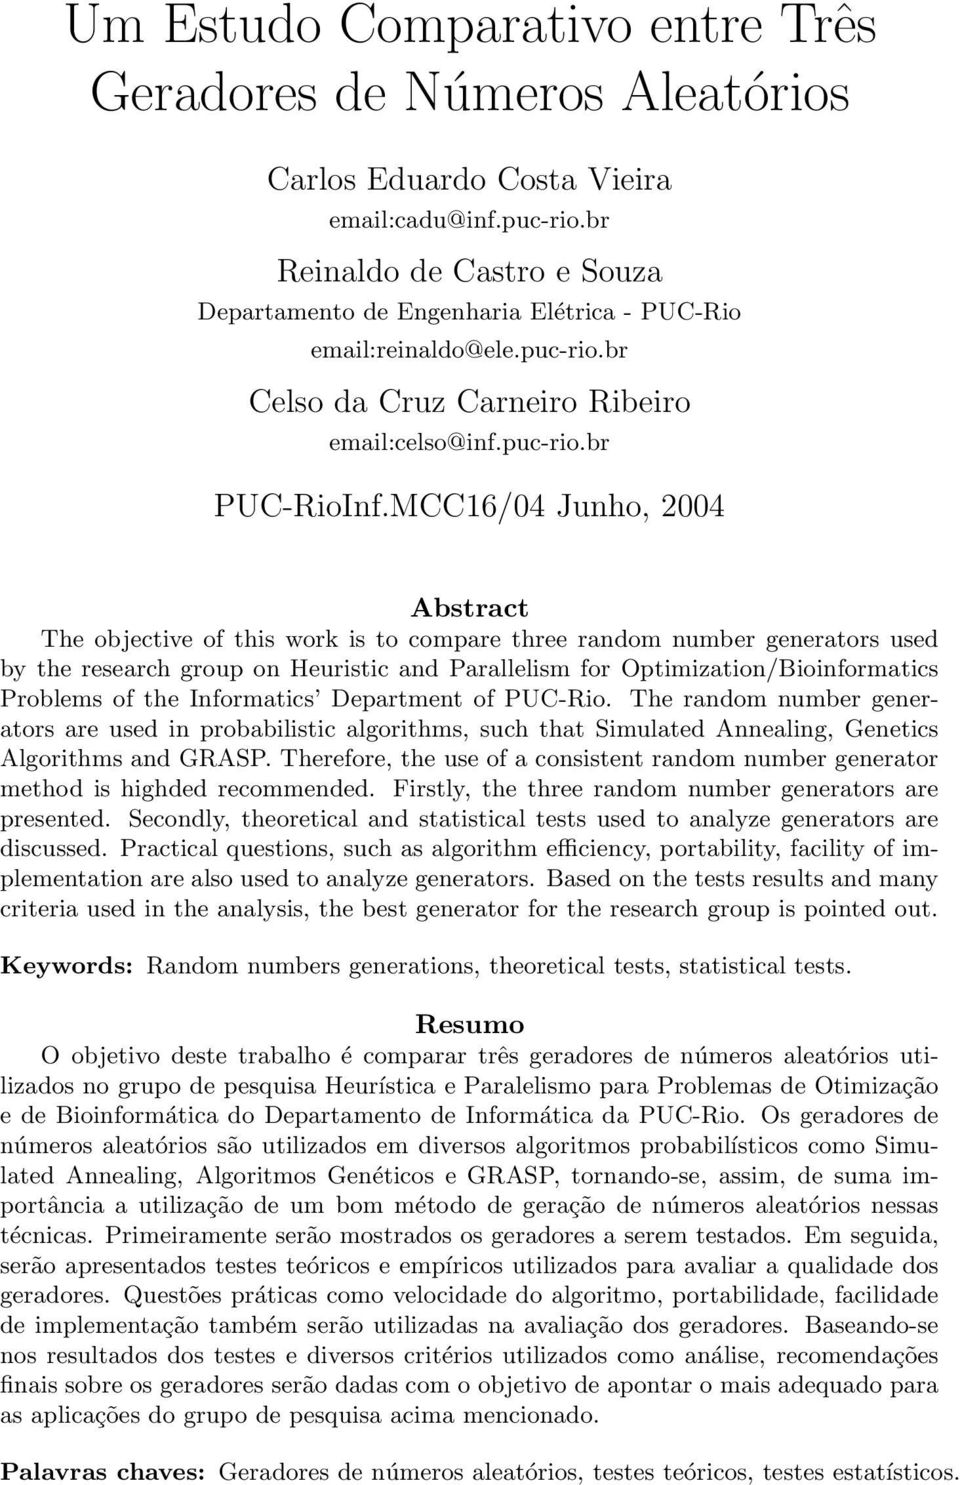 MCC16/04 Junho, 2004 Abstract The objective of this work is to compare three random number generators used by the research group on Heuristic and Parallelism for Optimization/Bioinformatics Problems